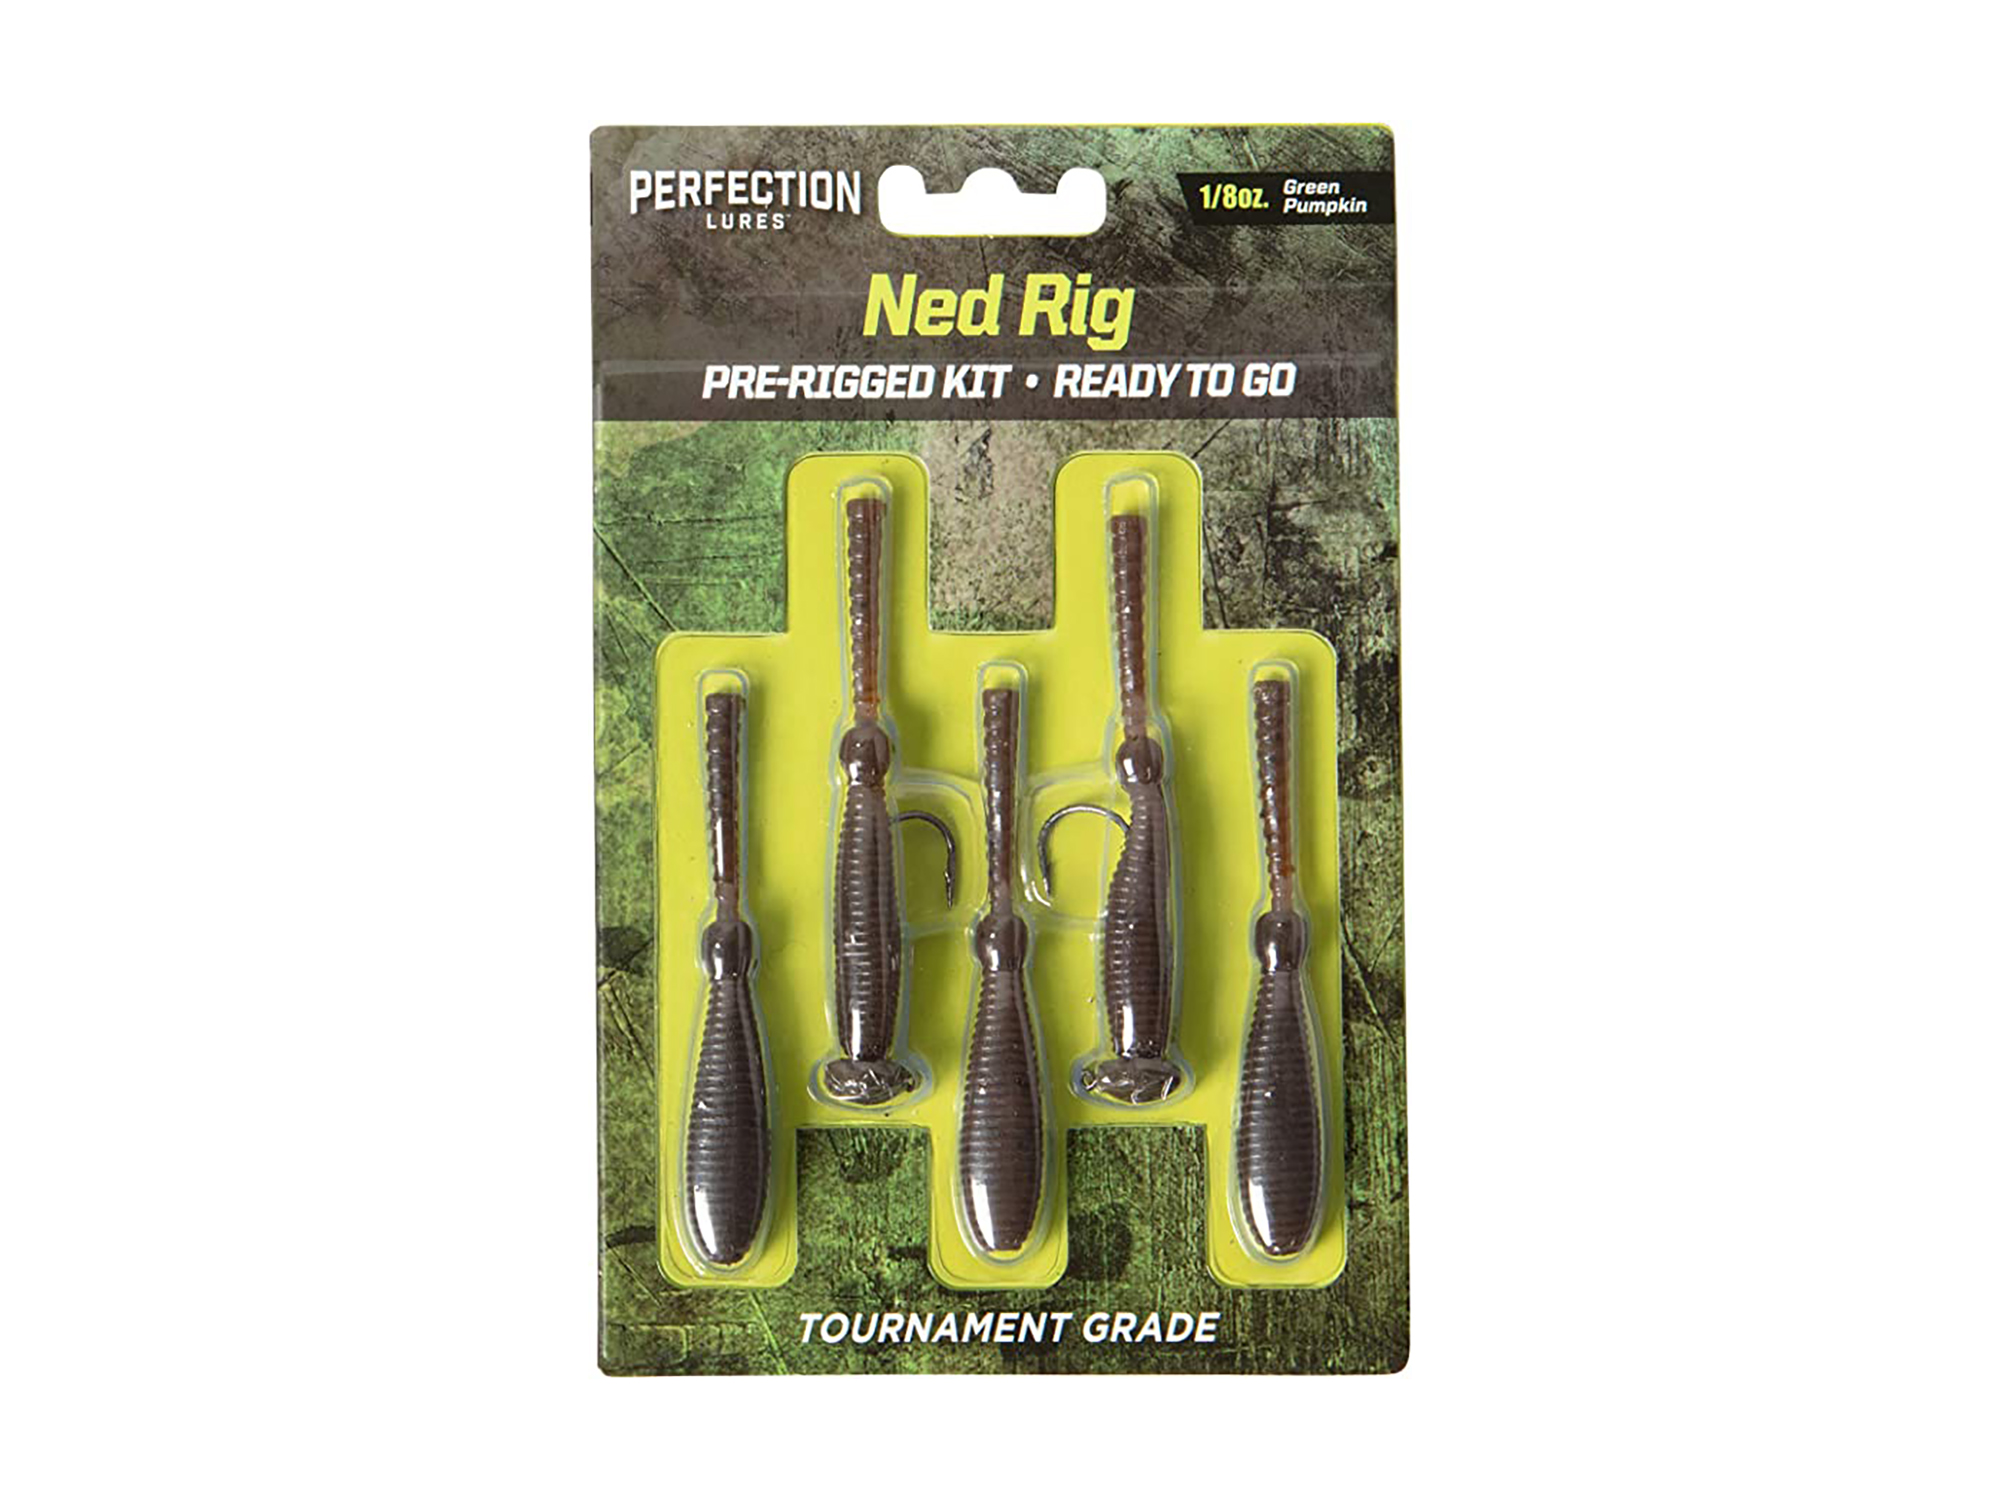 Perfection Lures Pre-Rigged Ned Rig Kit - Assorted Colors